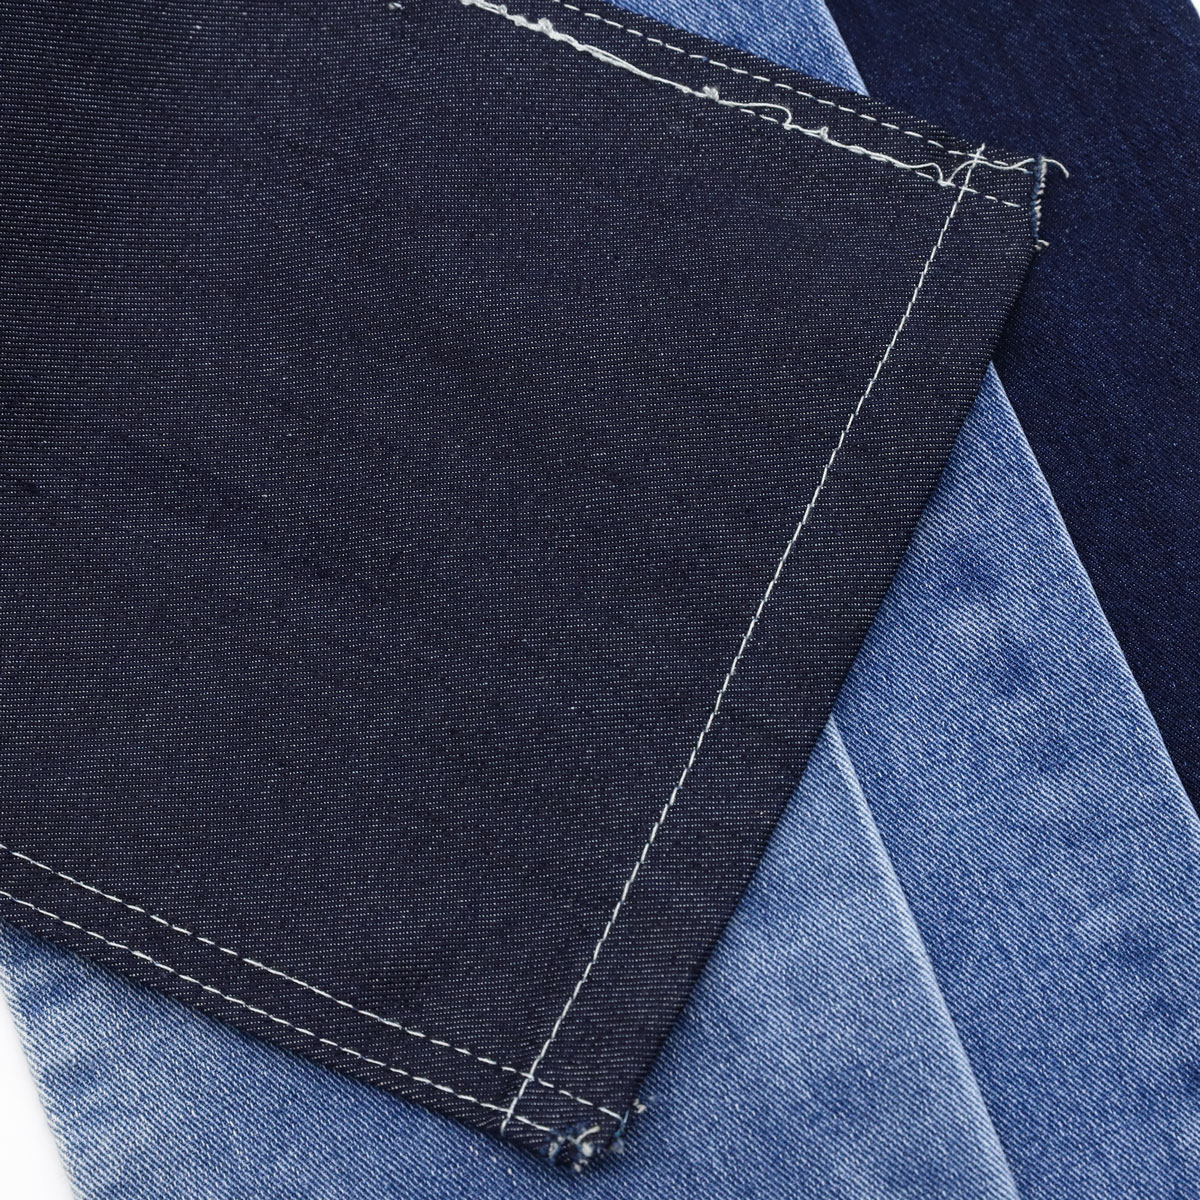 Best 5 Tips to Choose a Stretchable Denim Fabric 1